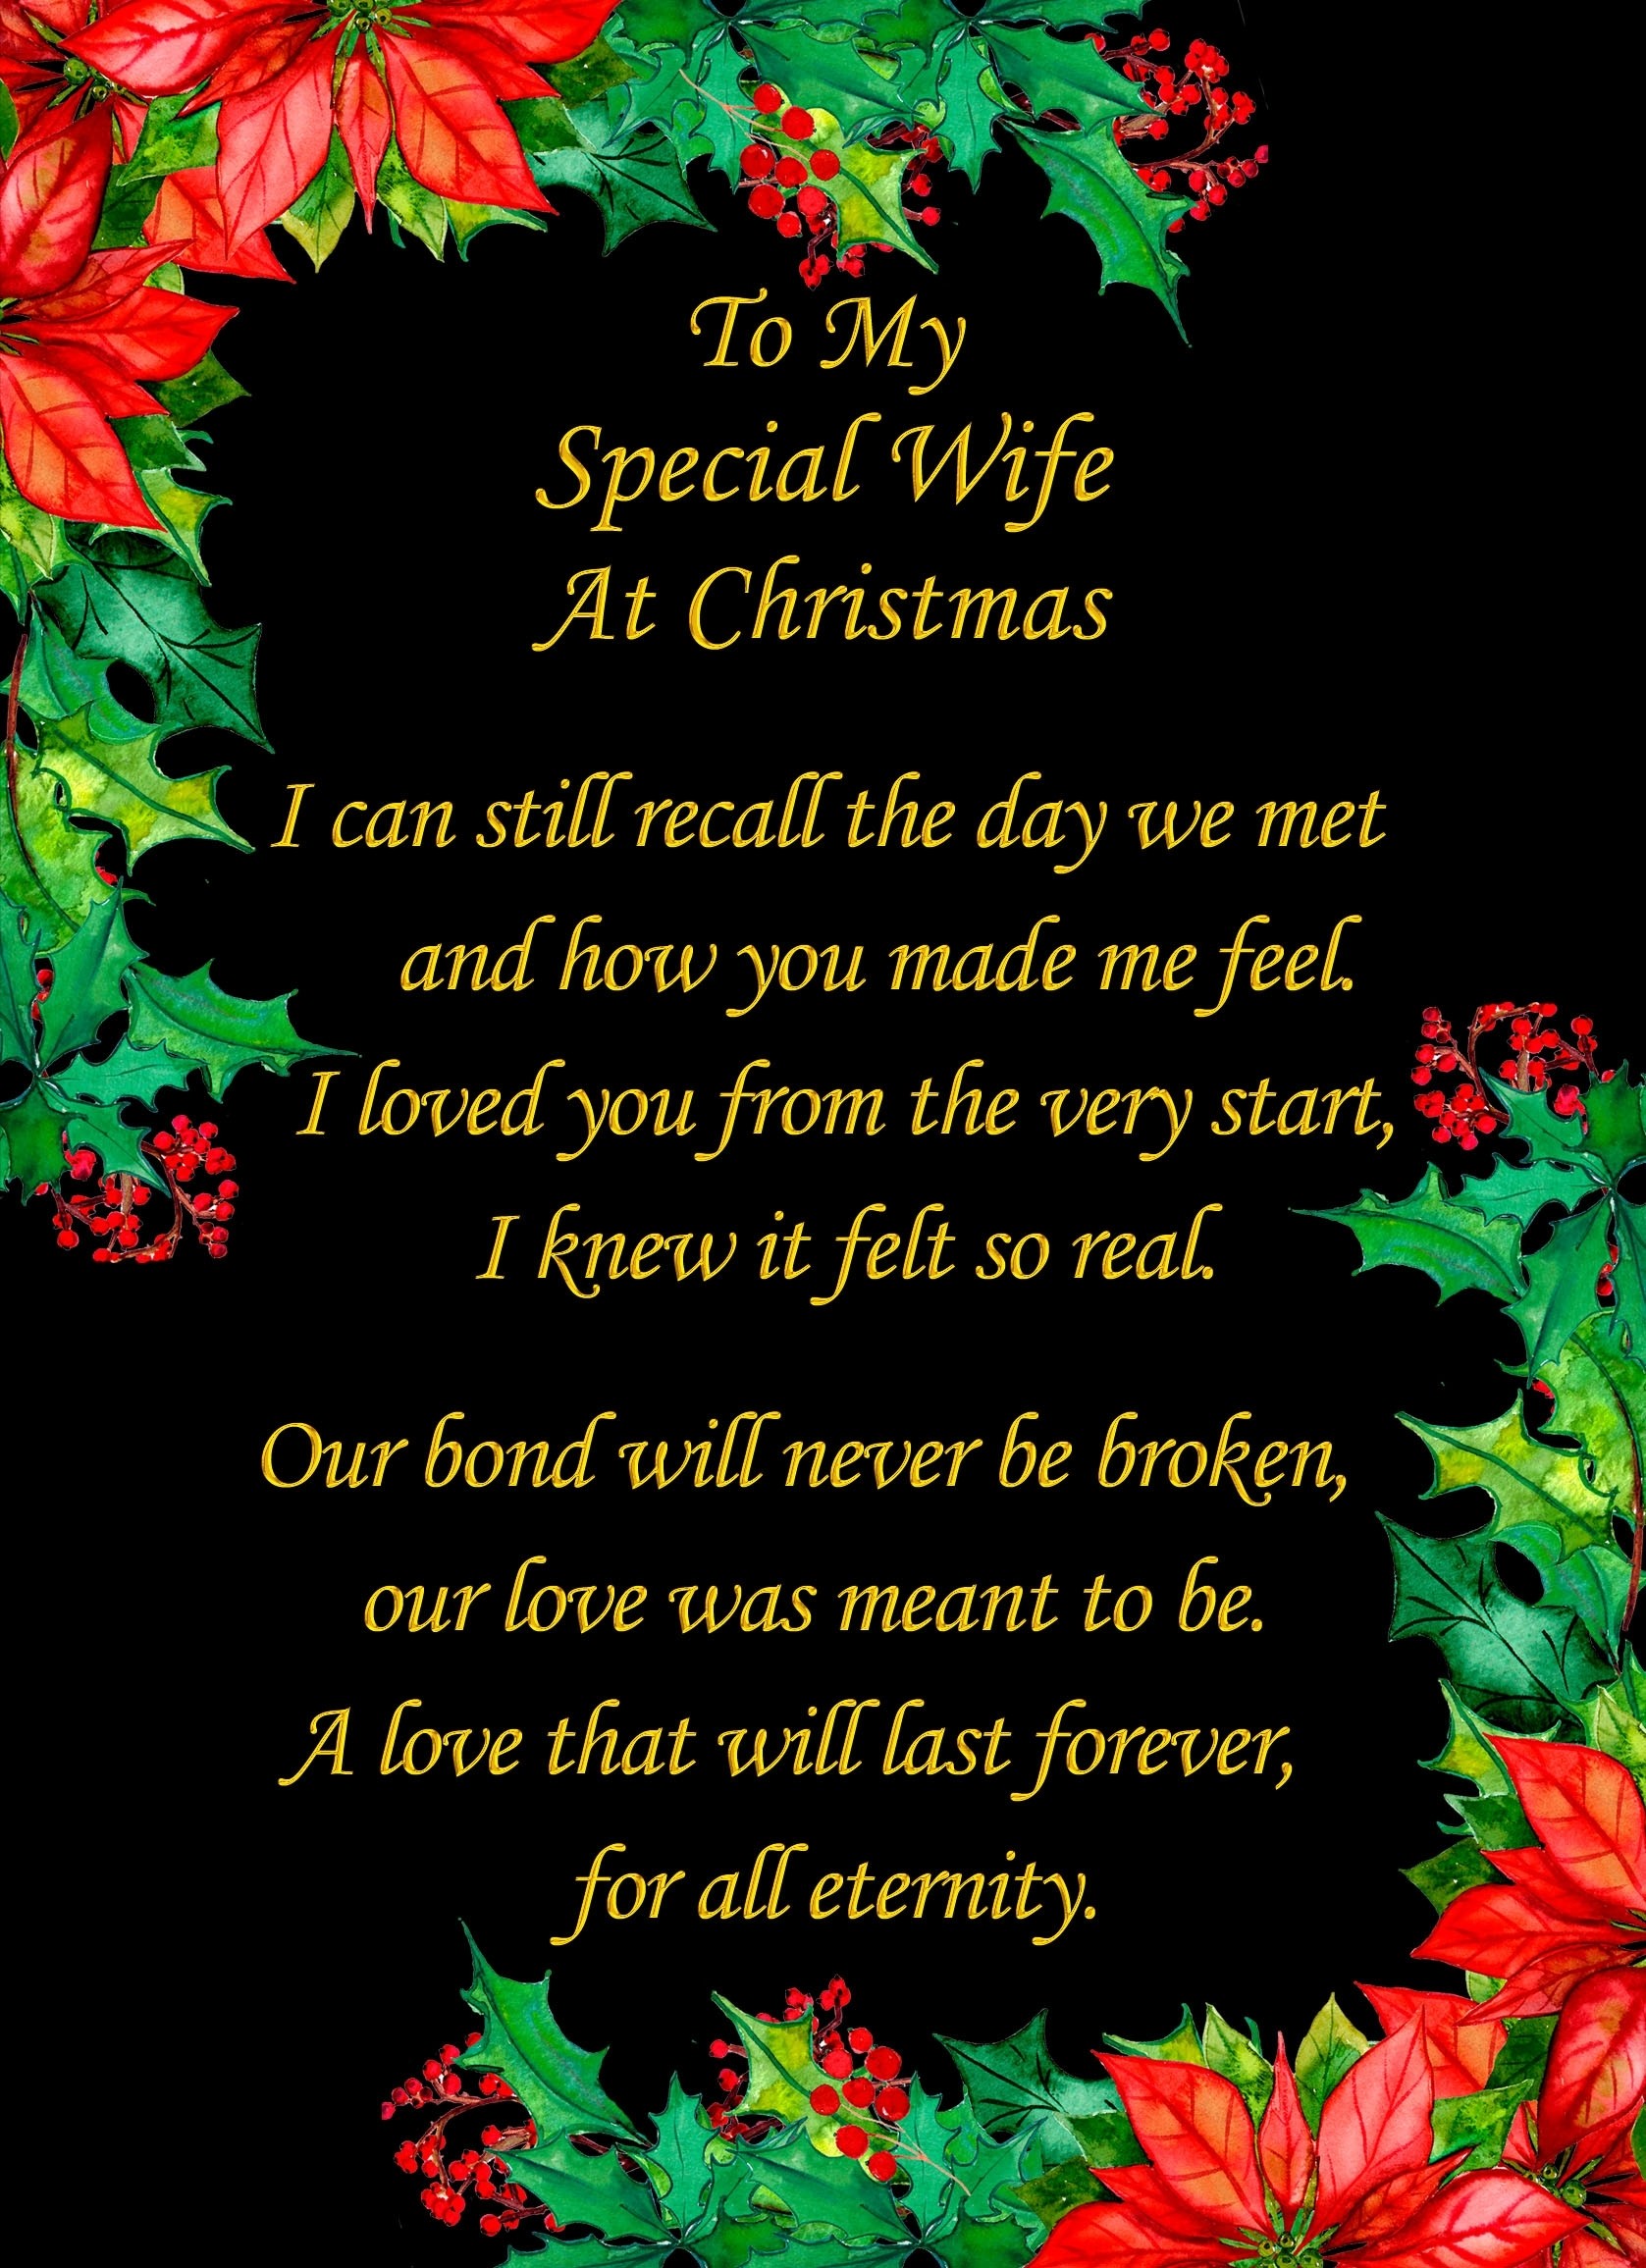 Christmas Card For Wife